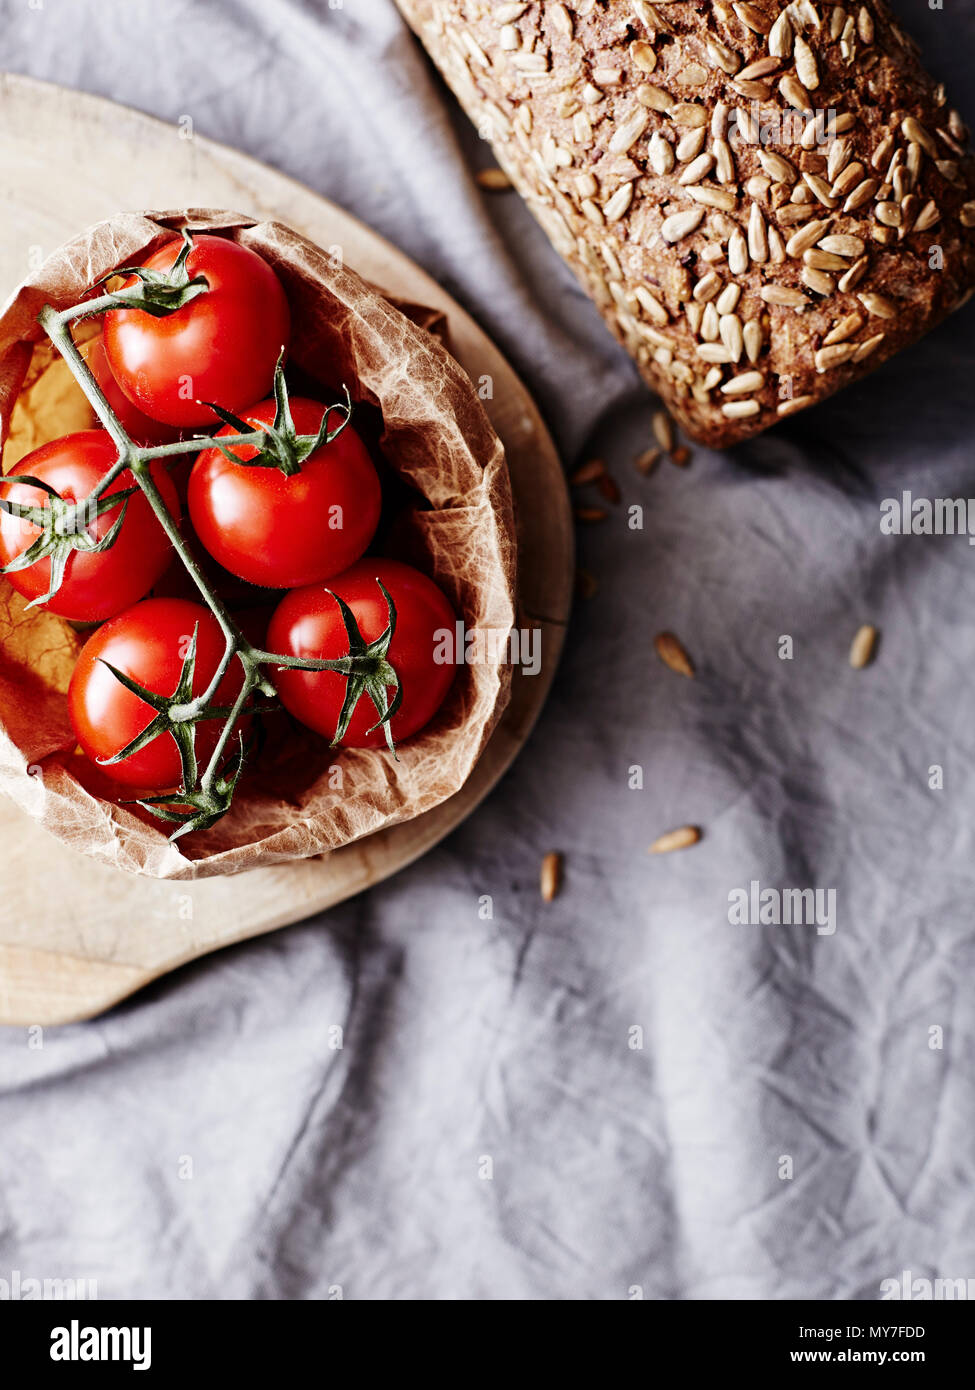 Still life of rye bread and vine tomatoes, overhead view Stock Photo